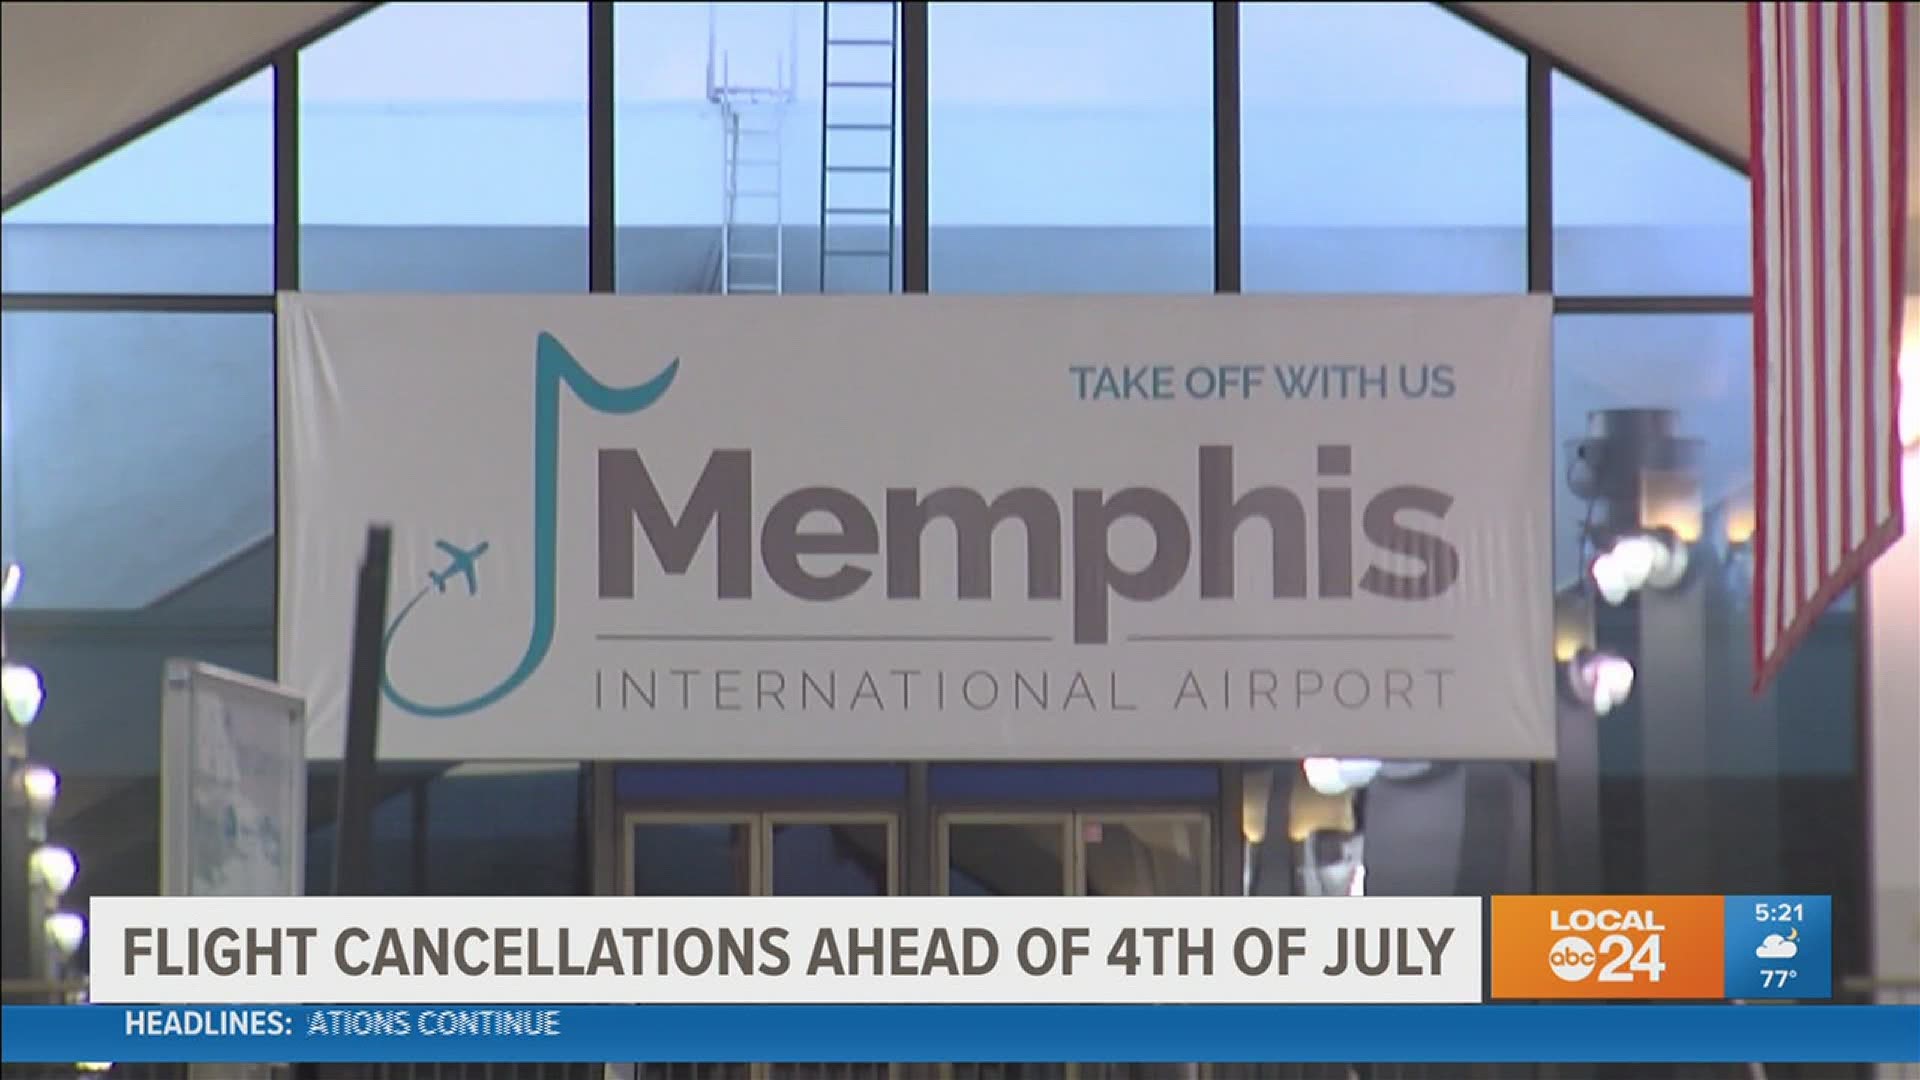 Memphis International Airport expects 4th of July to be a busy travel week and encourages fliers to arrive two hours early